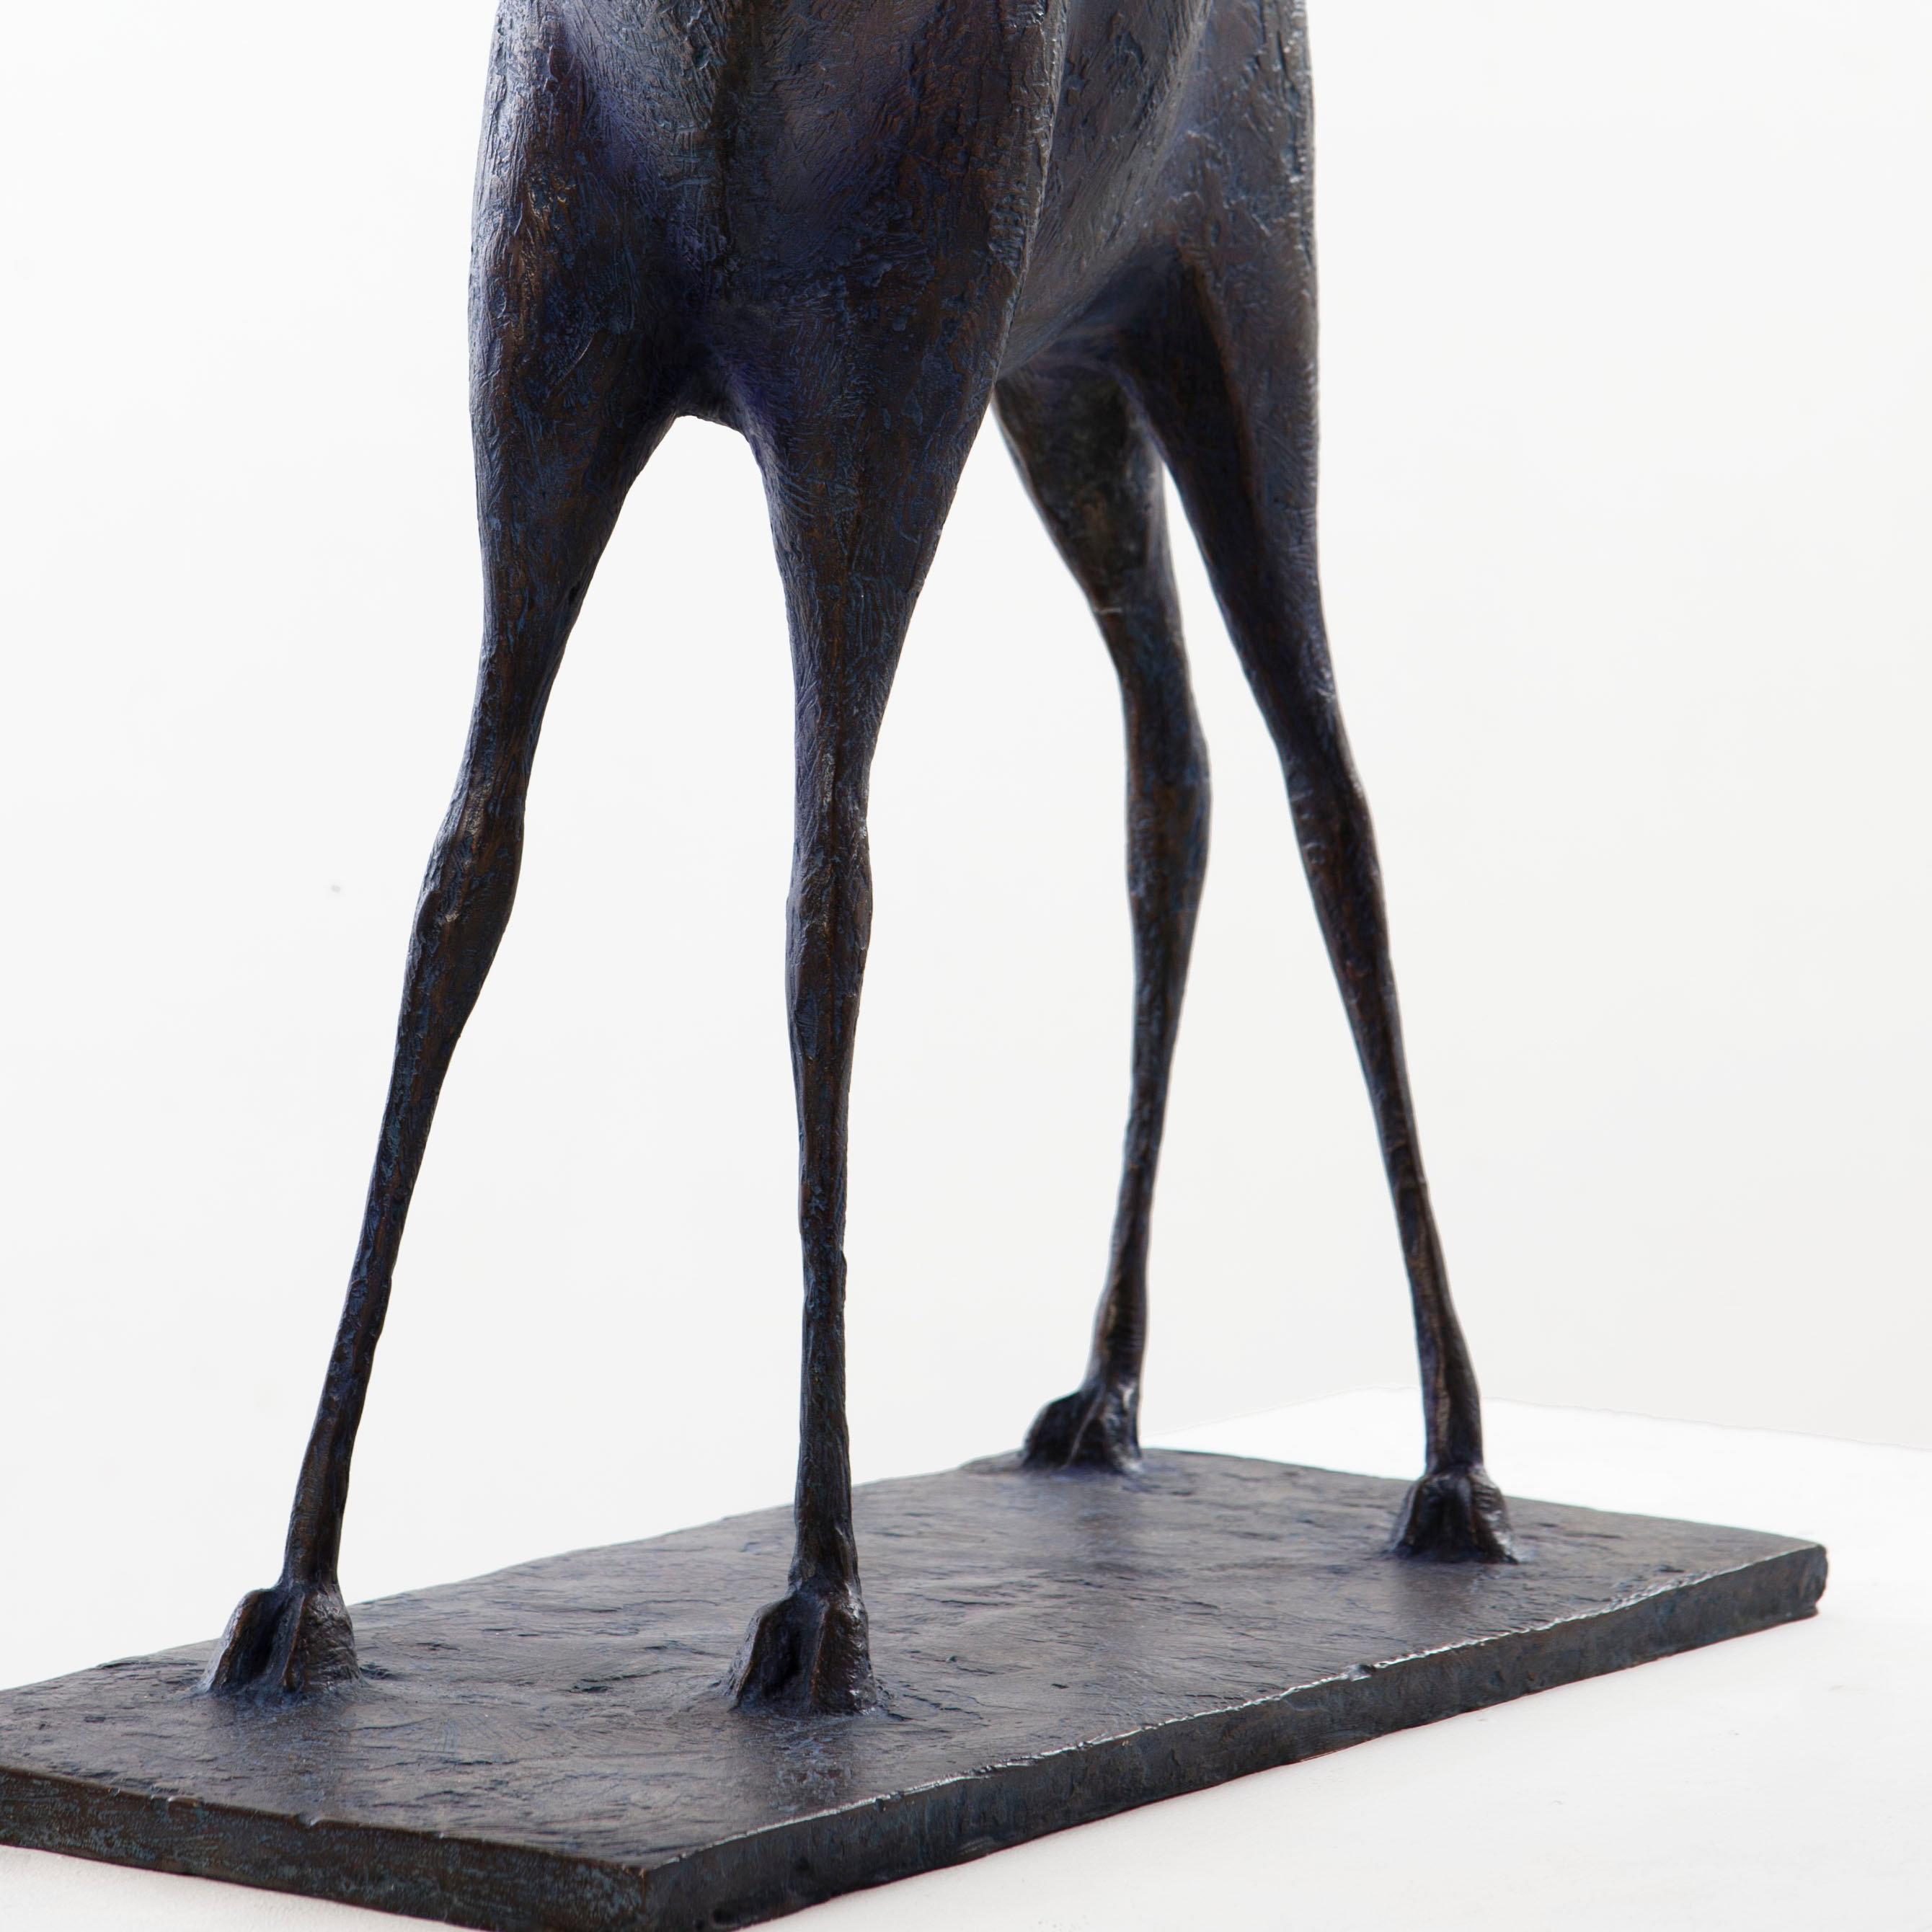 Bull IV (Taureau IV) by French contemporary artist Pierre Yermia. Bronze sculpture, 70 cm × 61 cm × 20 cm.
Signed and numbered. Limited edition of 8 copies and 4 artist's proofs.
